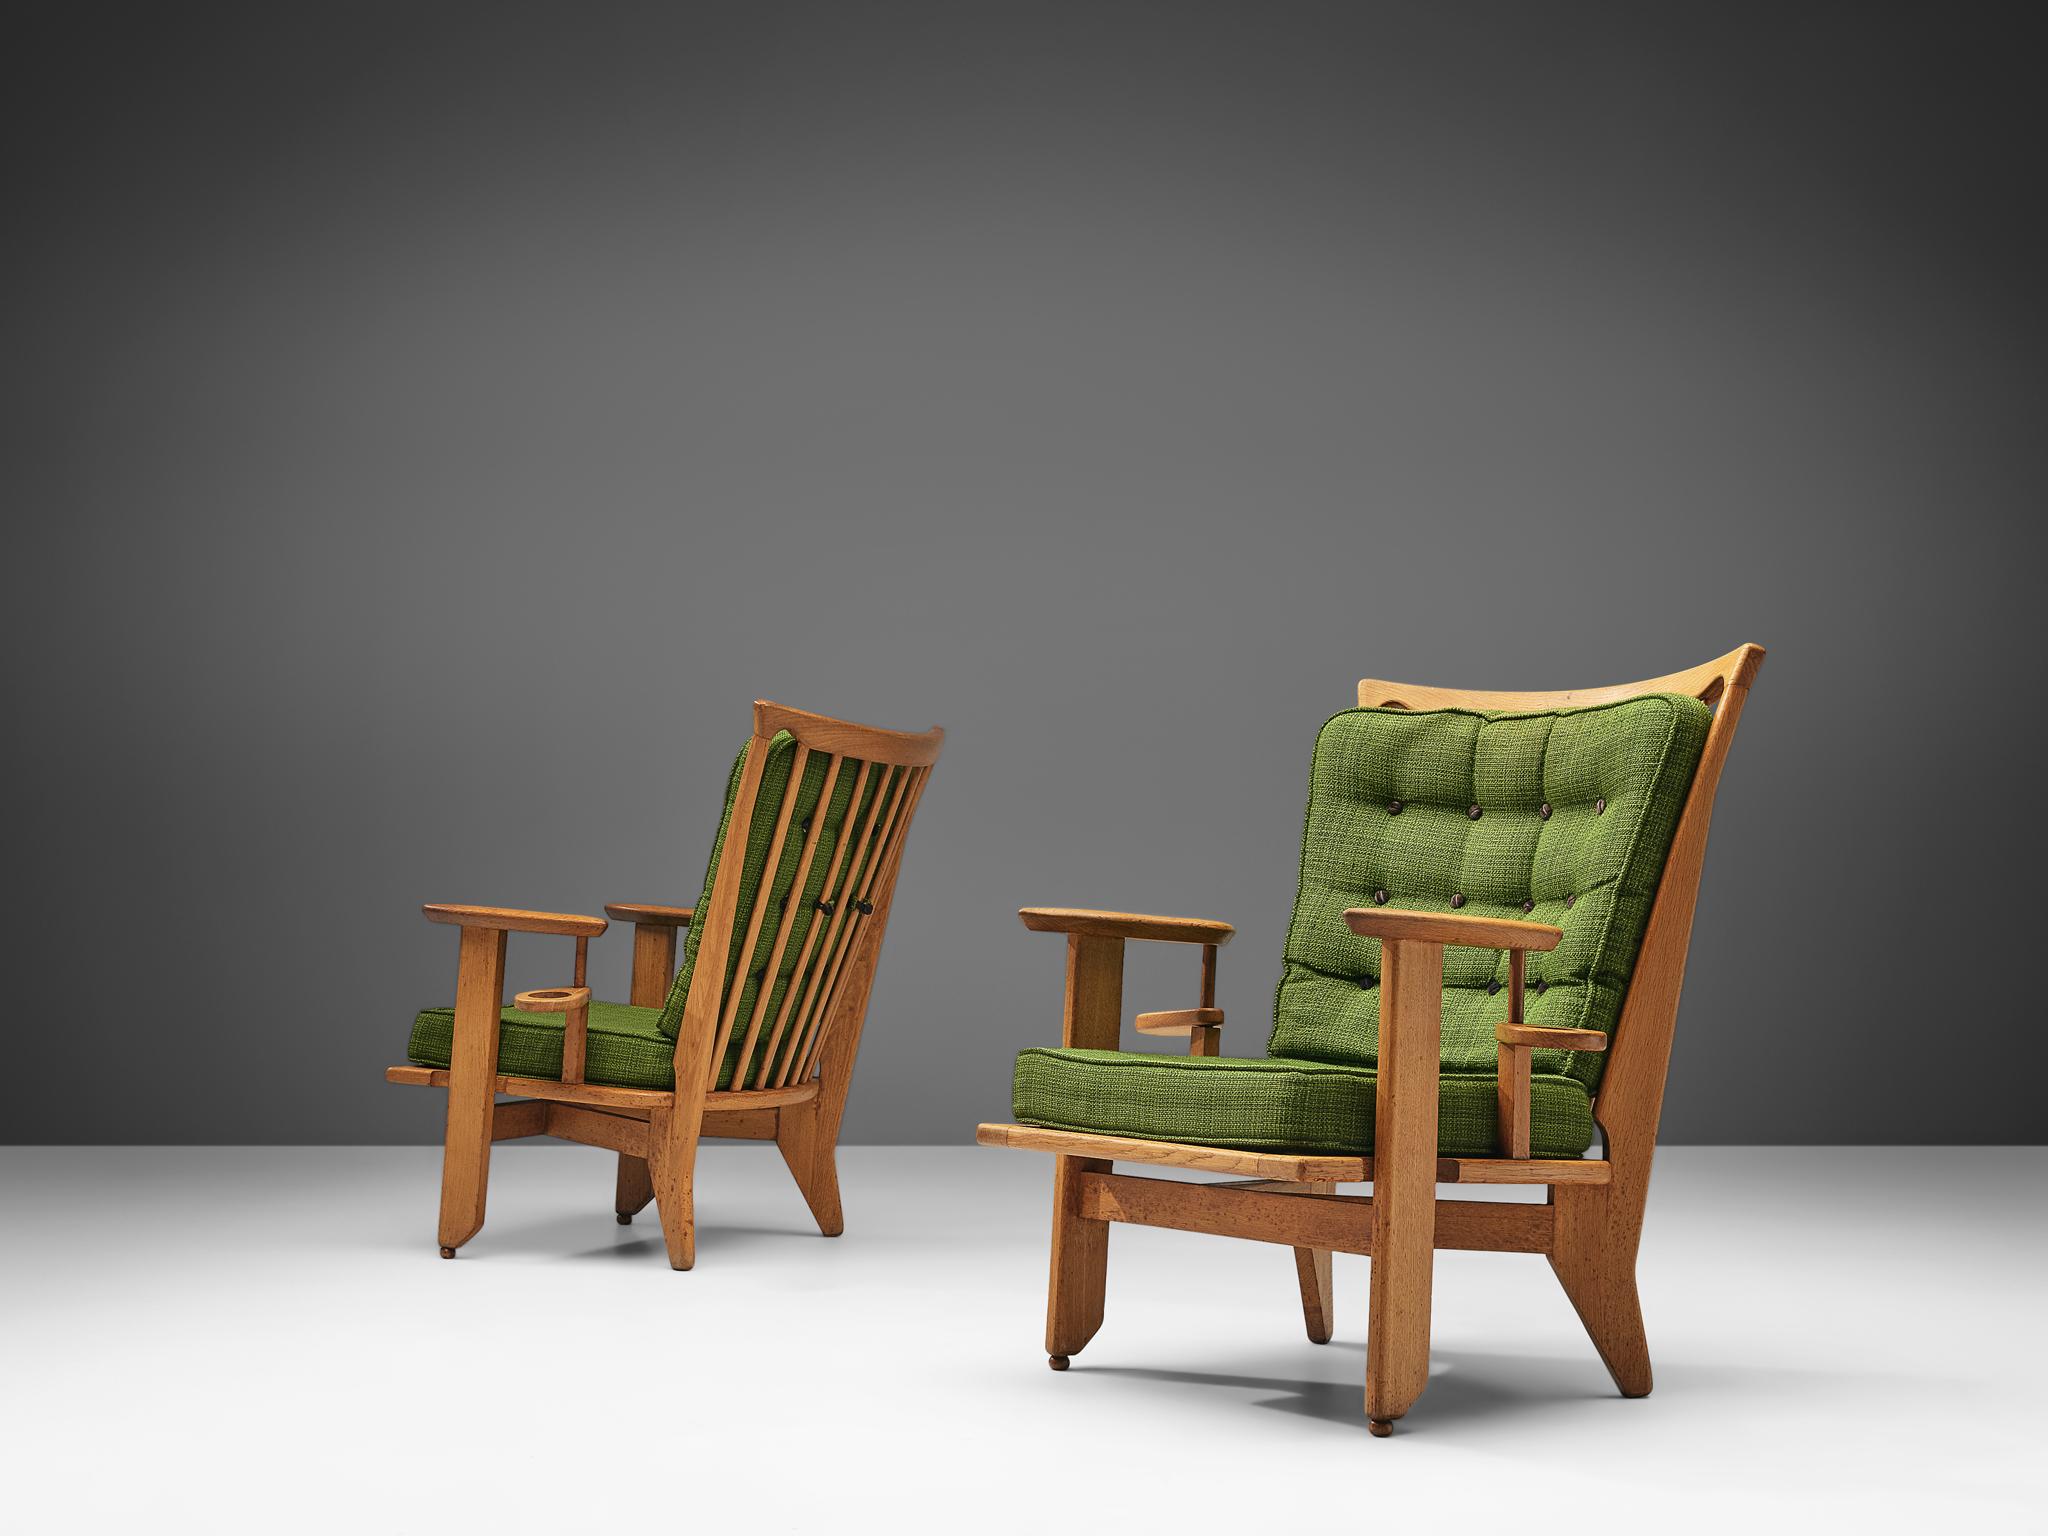 Guillerme et Chambron for Votre Maison, pair of lounge chairs, fabric, oak, France, 1960s

This French designer duo is known for their extreme high quality solid oak furniture, from which this set is another great example. These chairs have a very